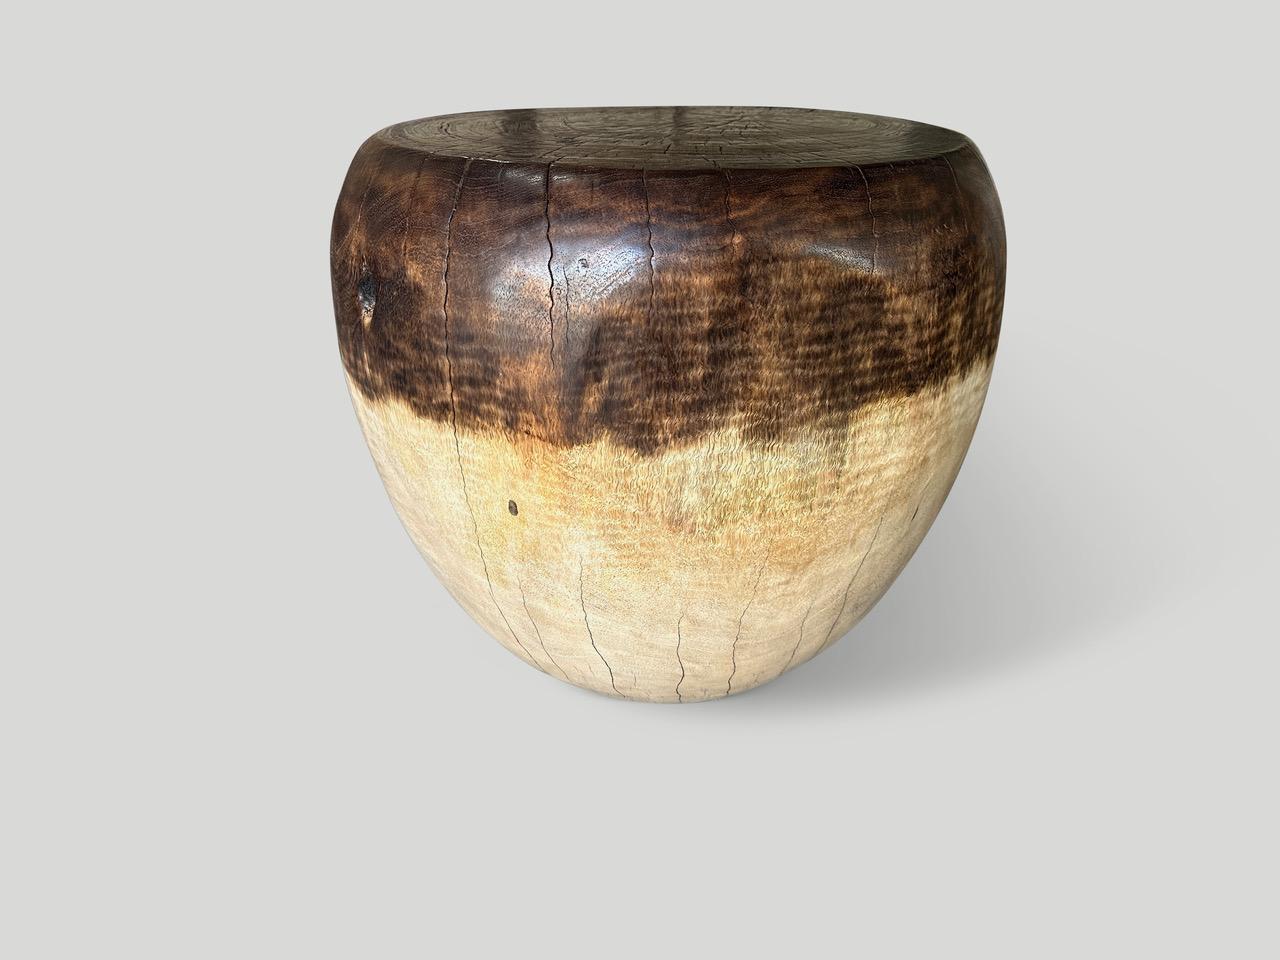 Reclaimed mango wood side table hand carved into an impressive drum shape. We partially stained the top half a chocolate brown and added a natural oil revealing the beautiful wood grain. It’s all in the details. Full dimensions; Top 16